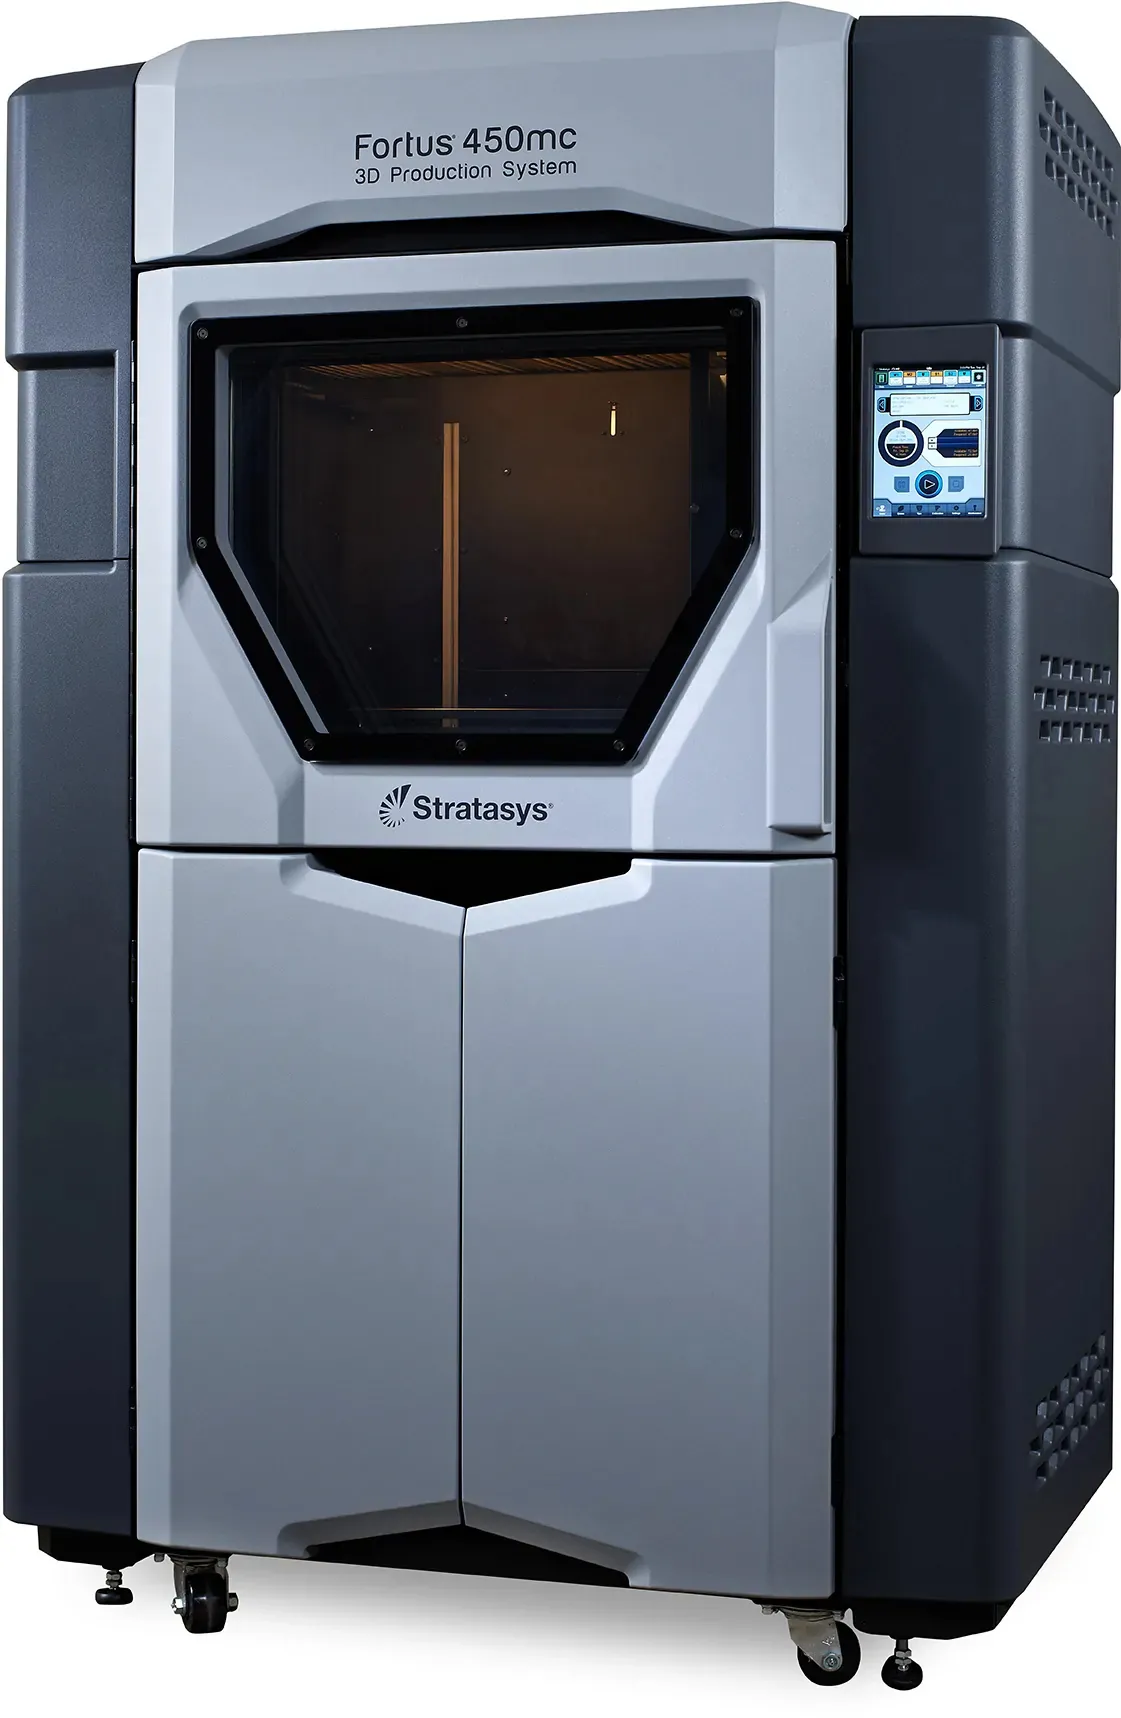 Fortus 450mc 3D Printer available from GoEngineer